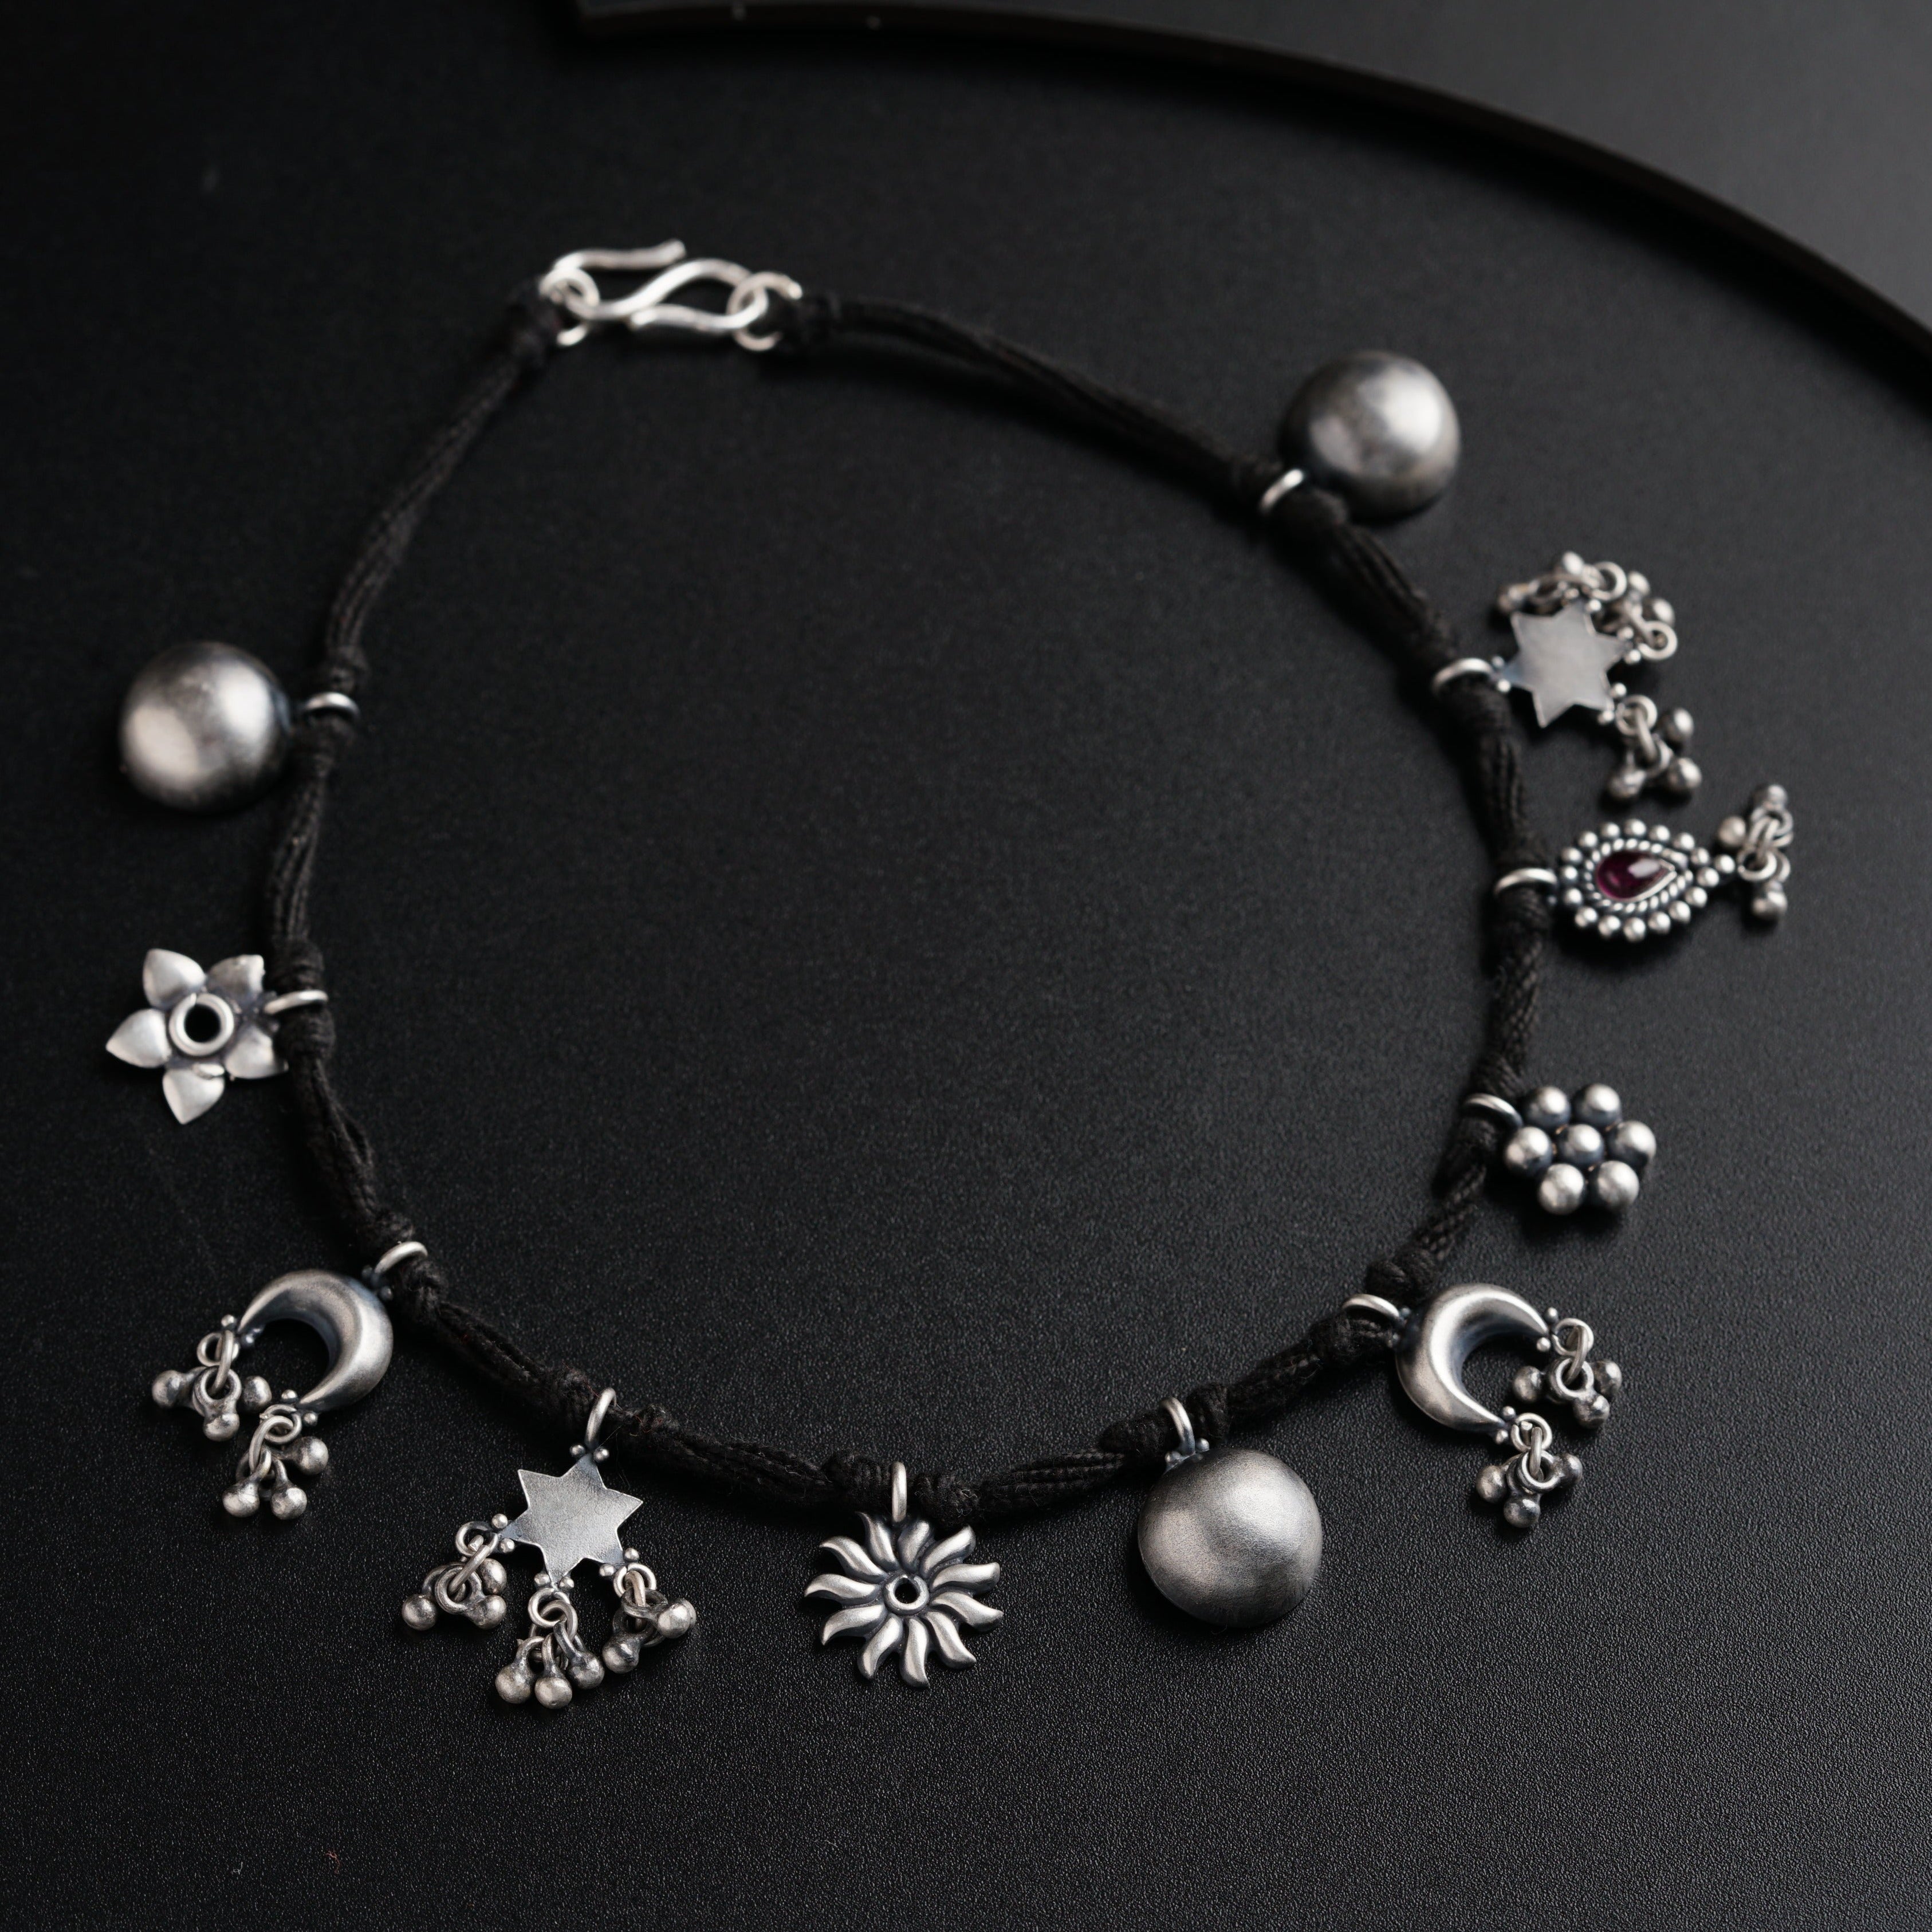 a black string bracelet with silver beads and charms